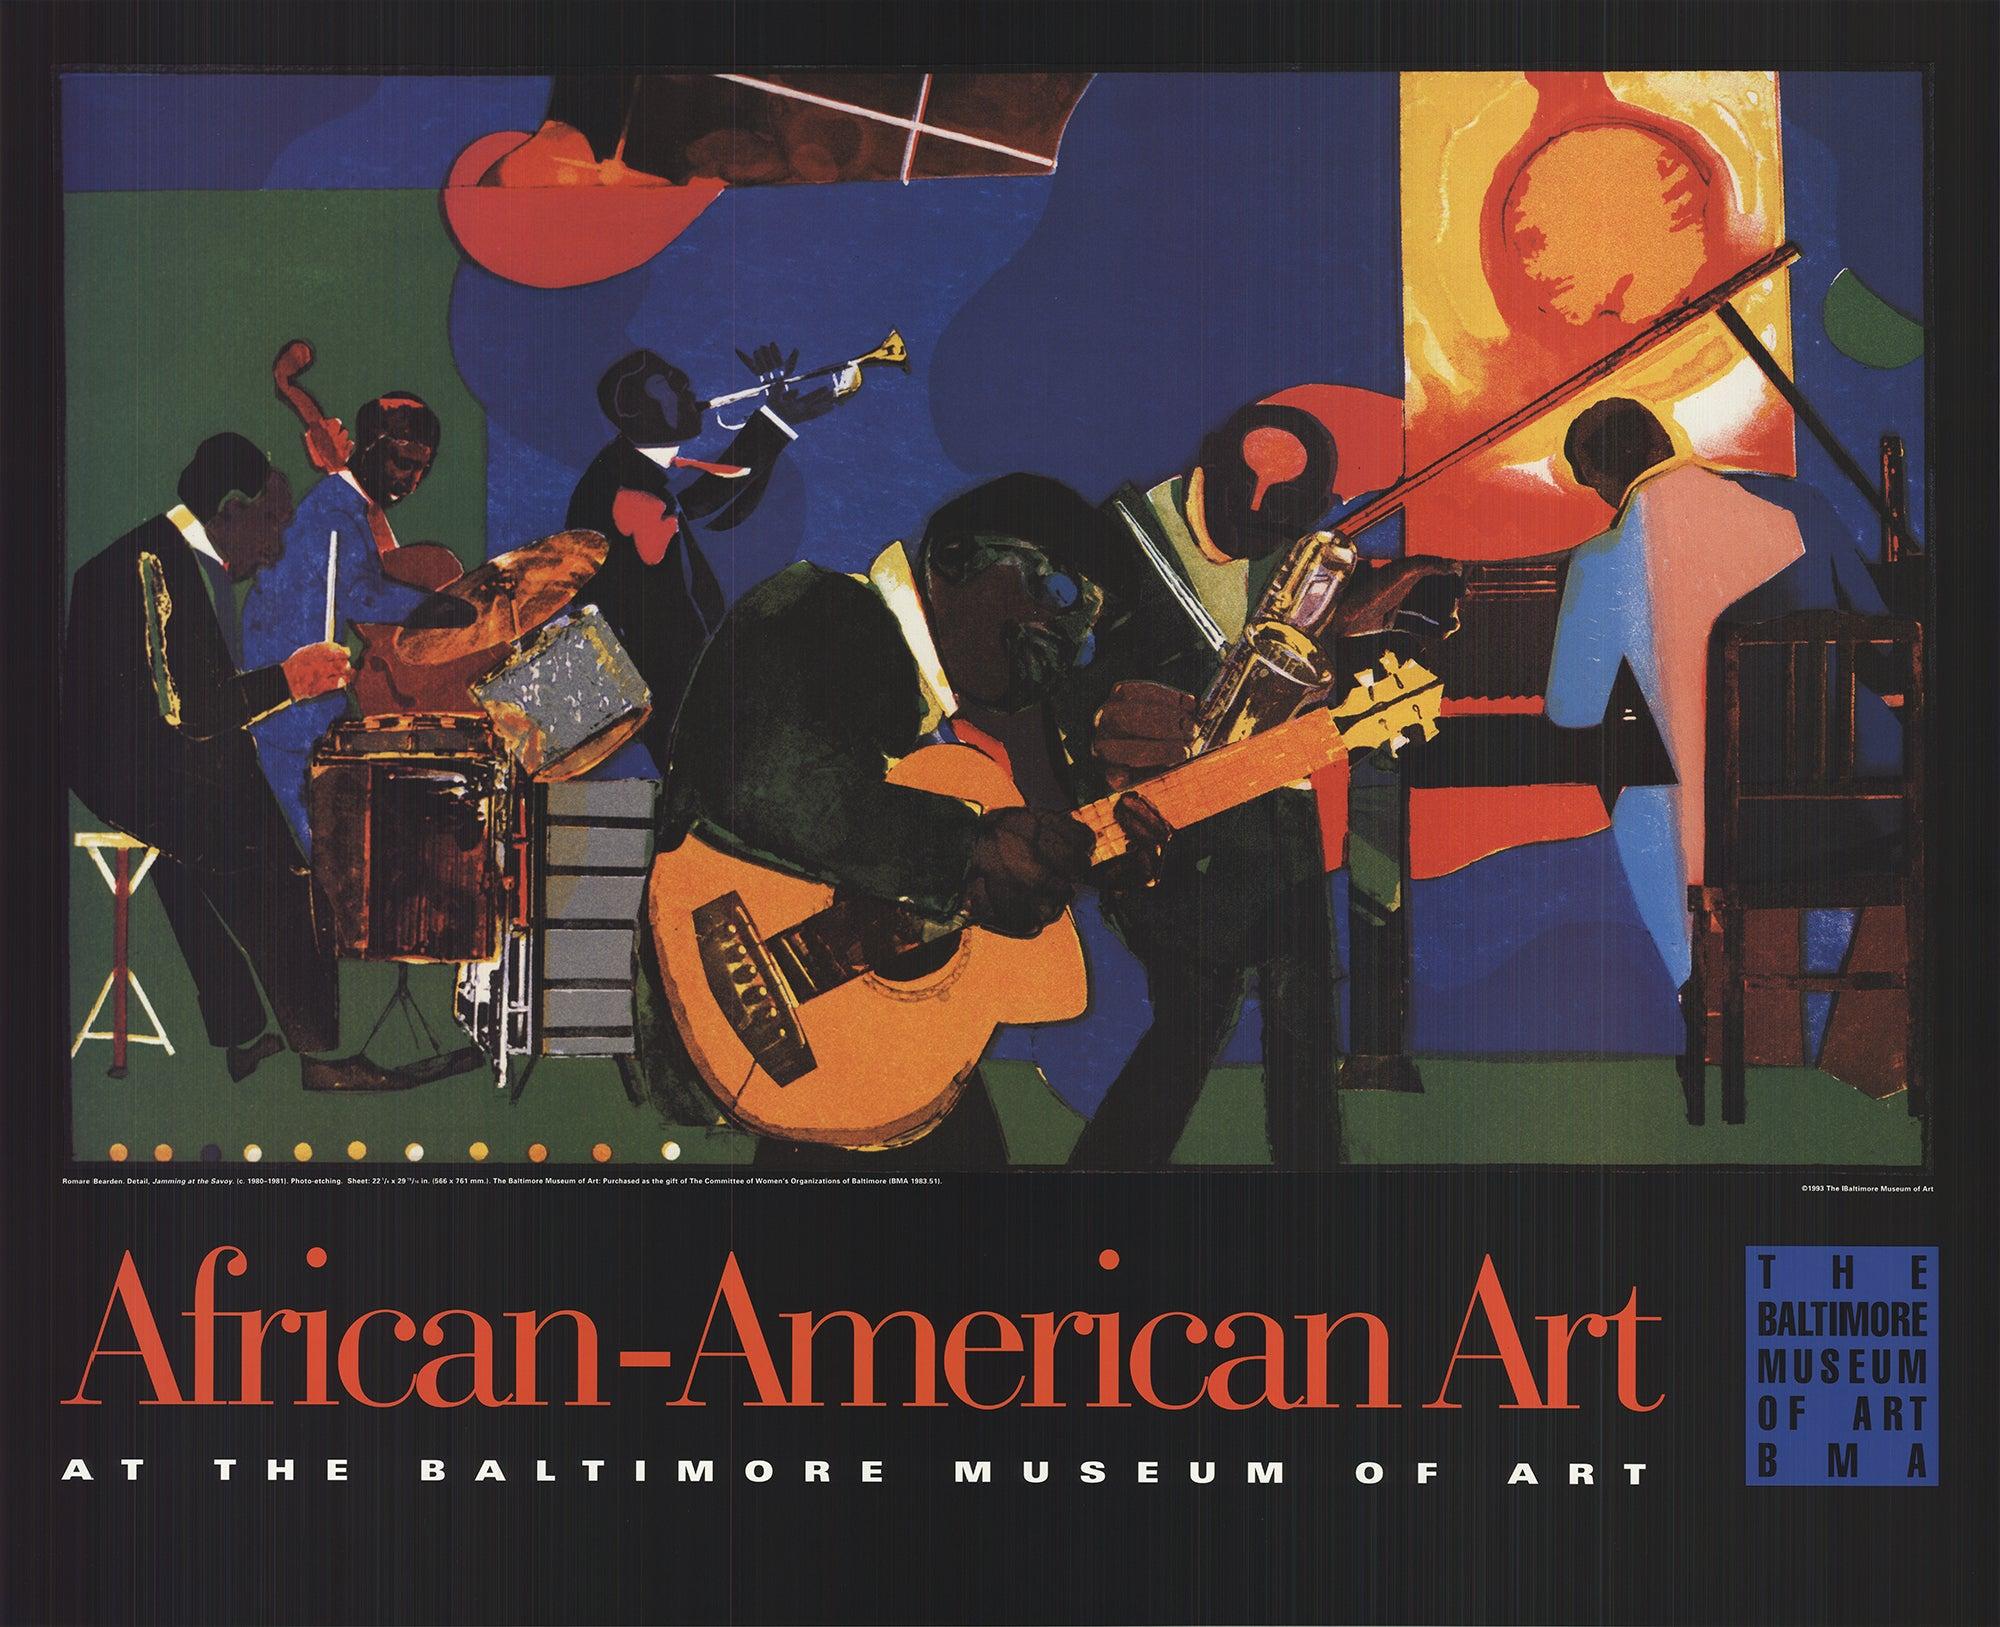 Paper Size: 26 x 32 inches ( 66.04 x 81.28 cm )
Image Size: 17.75 x 30 inches ( 45.085 x 76.2 cm )
Framed: No
Condition: A: Mint

Additional Details: Rare exhibition poster from the The Philadelphia Art Museum published in 1993.

Shipping and